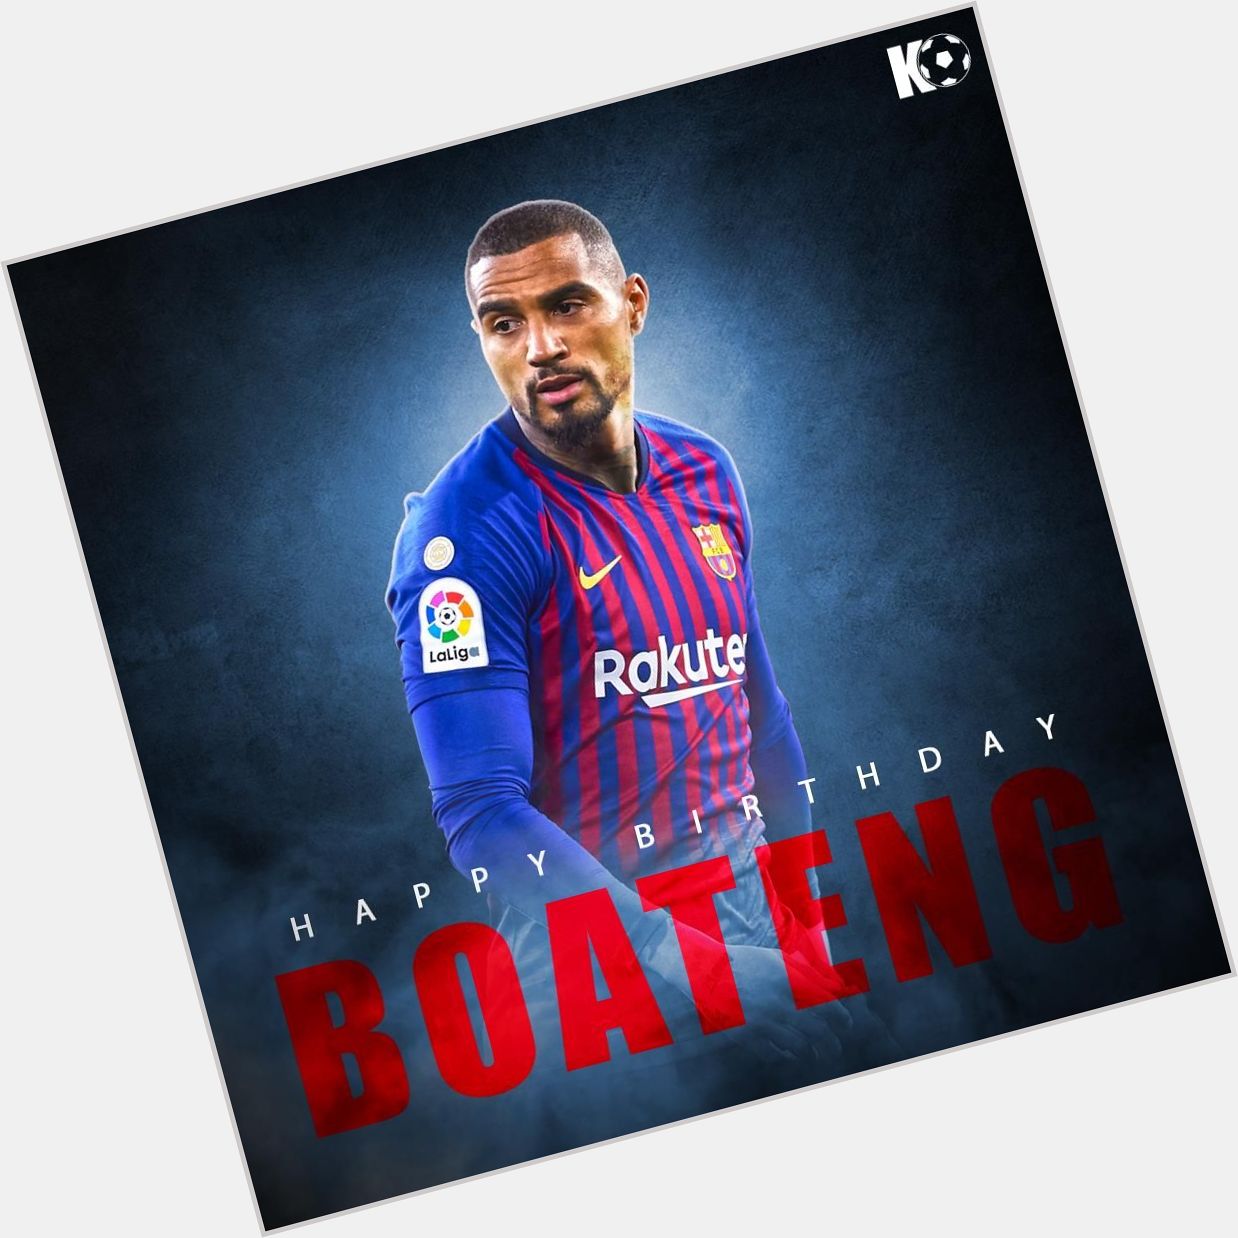 The Fresh Prince turns 32 today! Join in wishing Kevin-Prince Boateng a Happy Birthday 